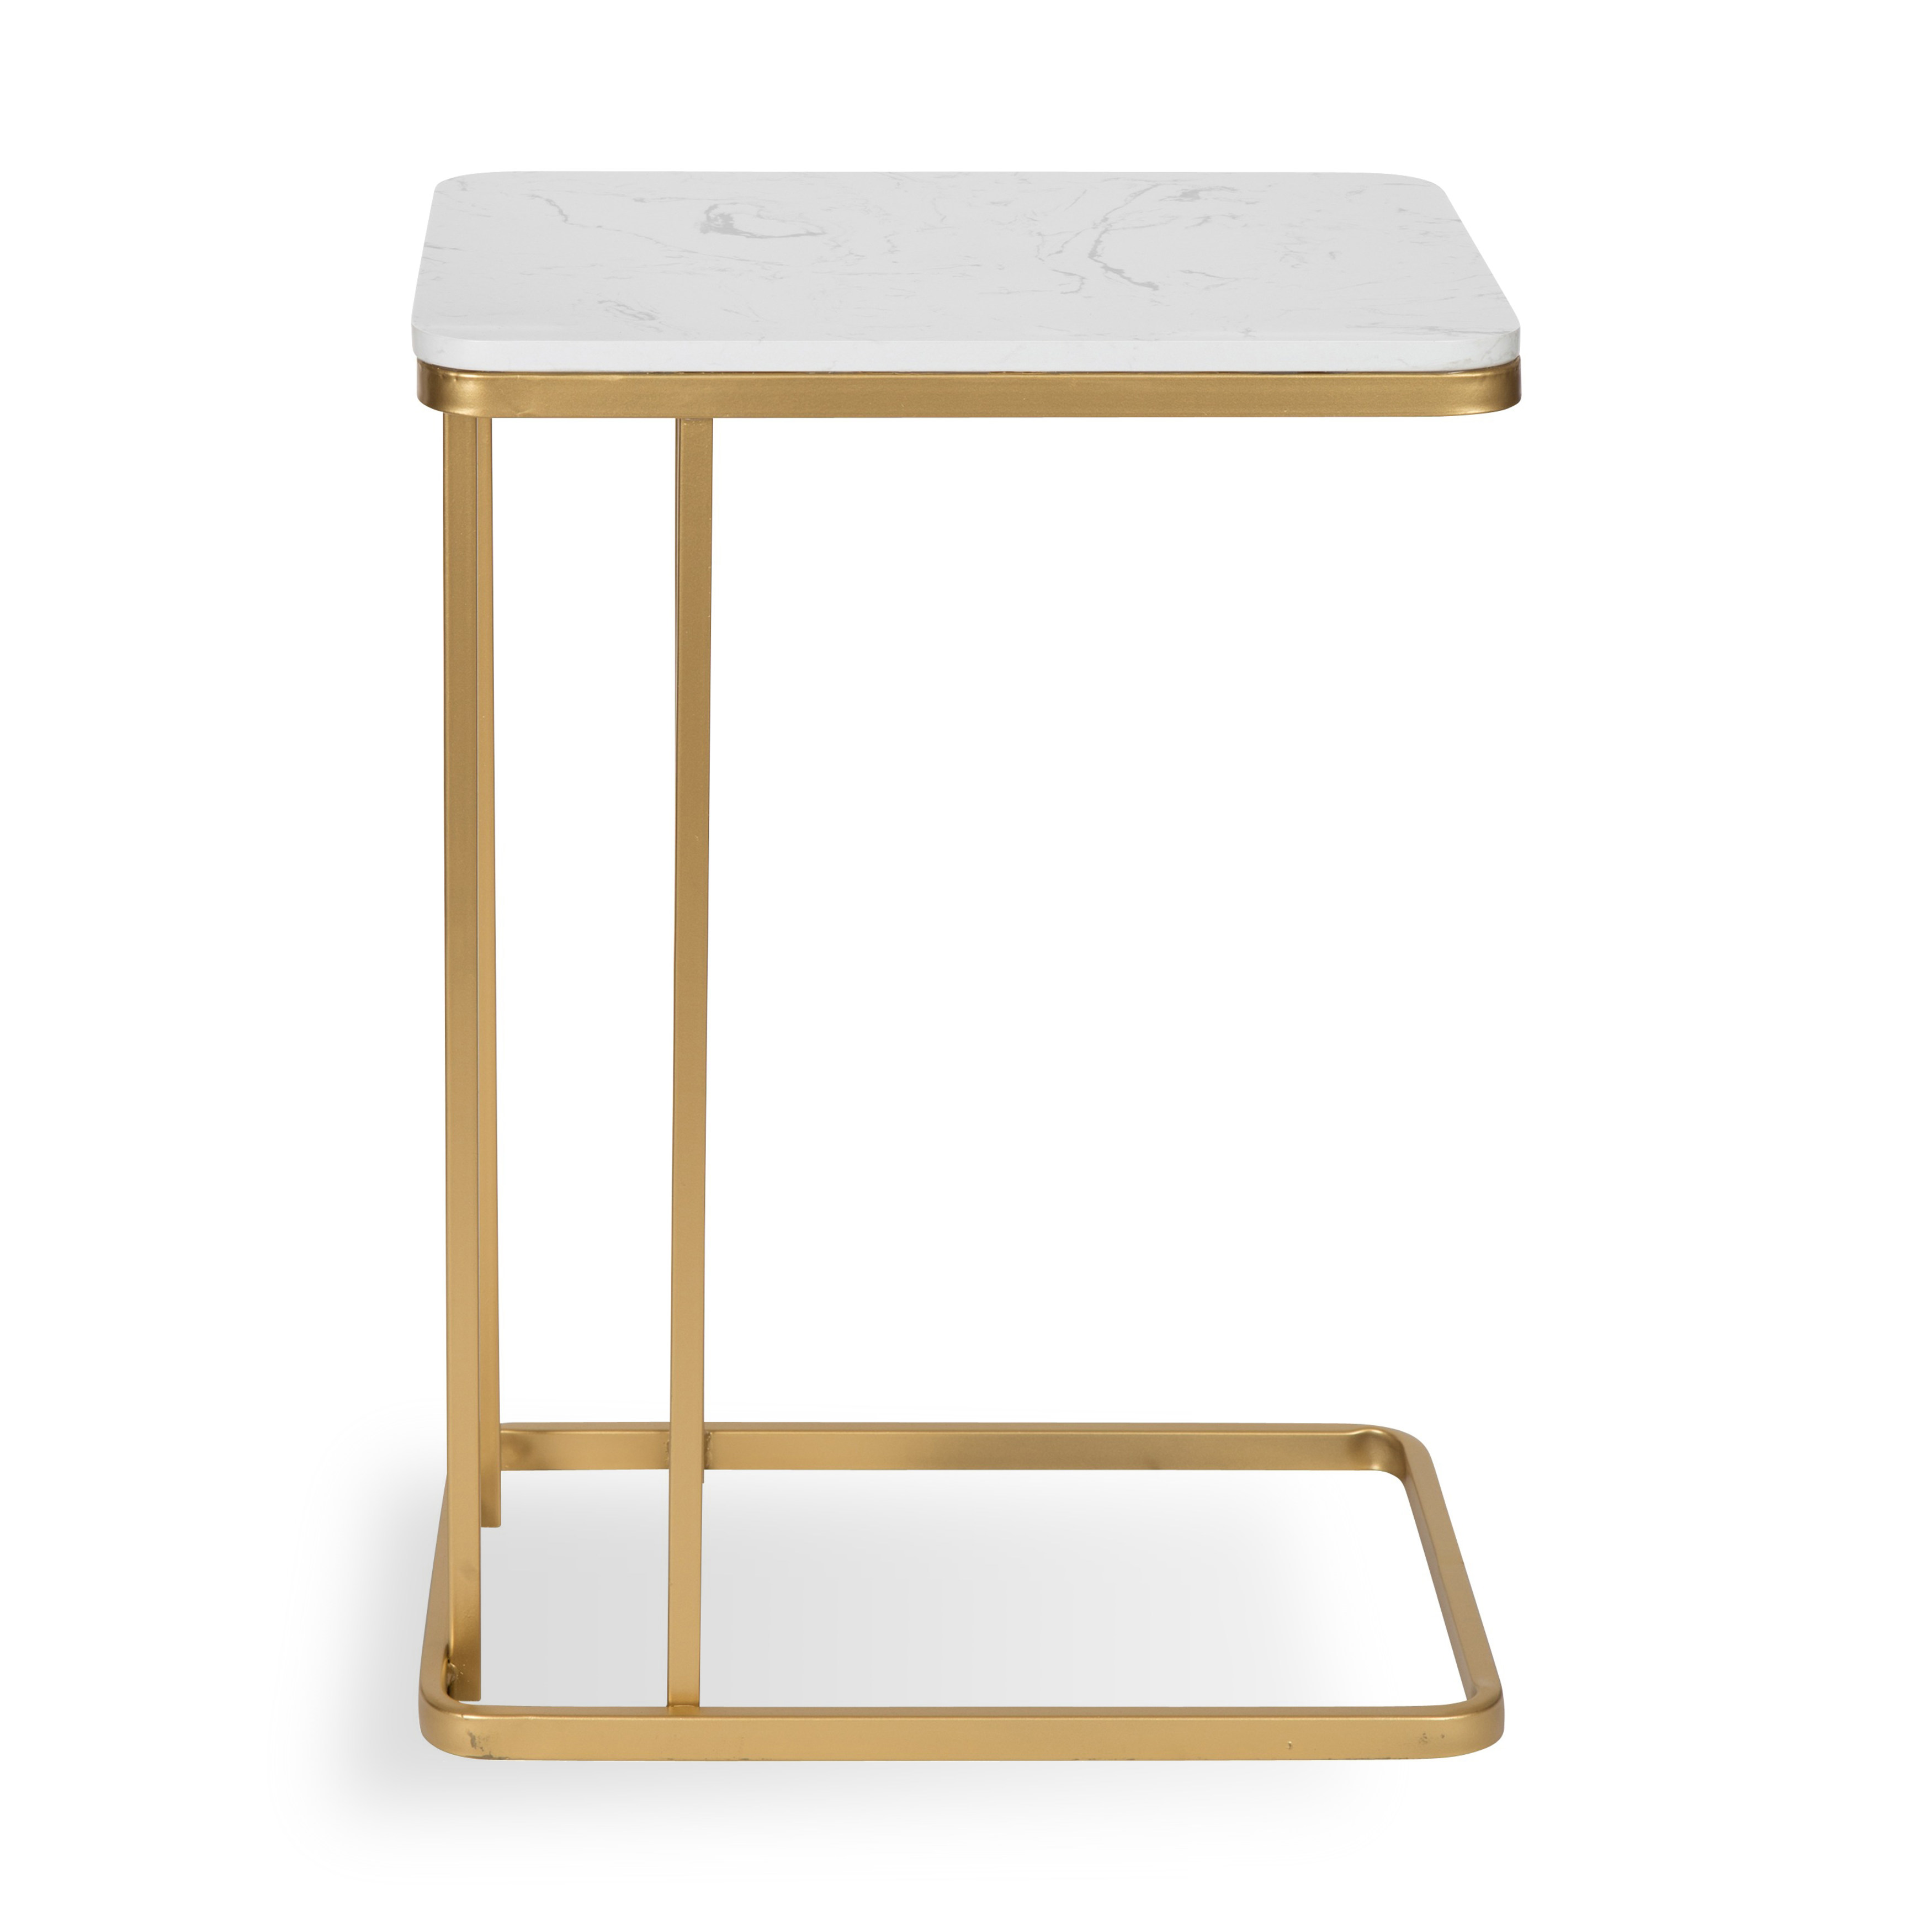 Kate and Laurel Credele Marble Sofa Side C-Table with Gold Metal Base - image 3 of 6